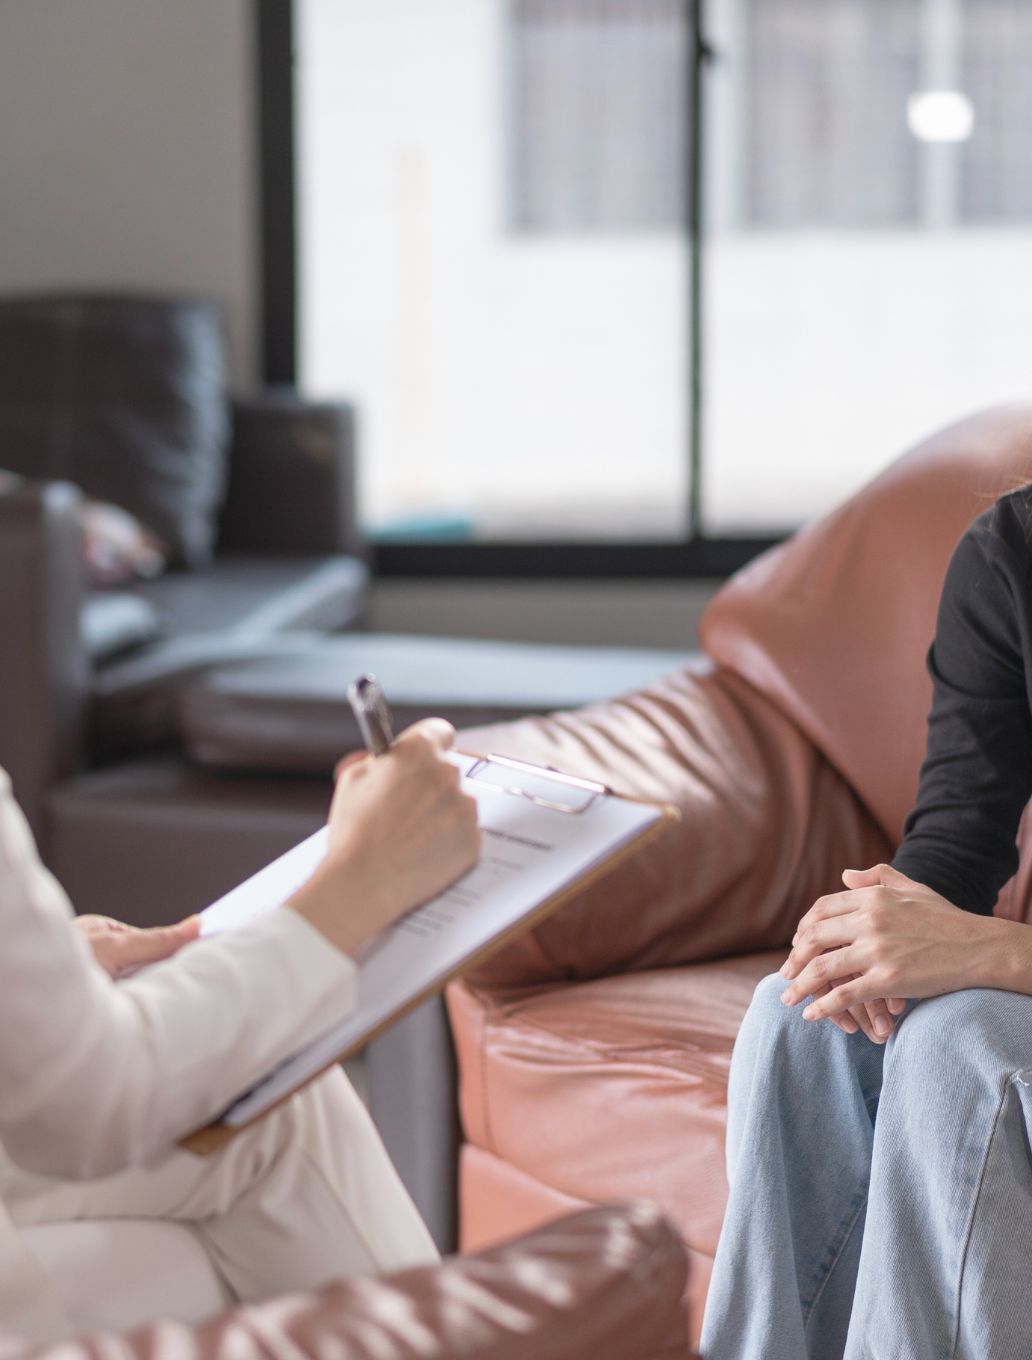 Women receiving counselling session in Penrith